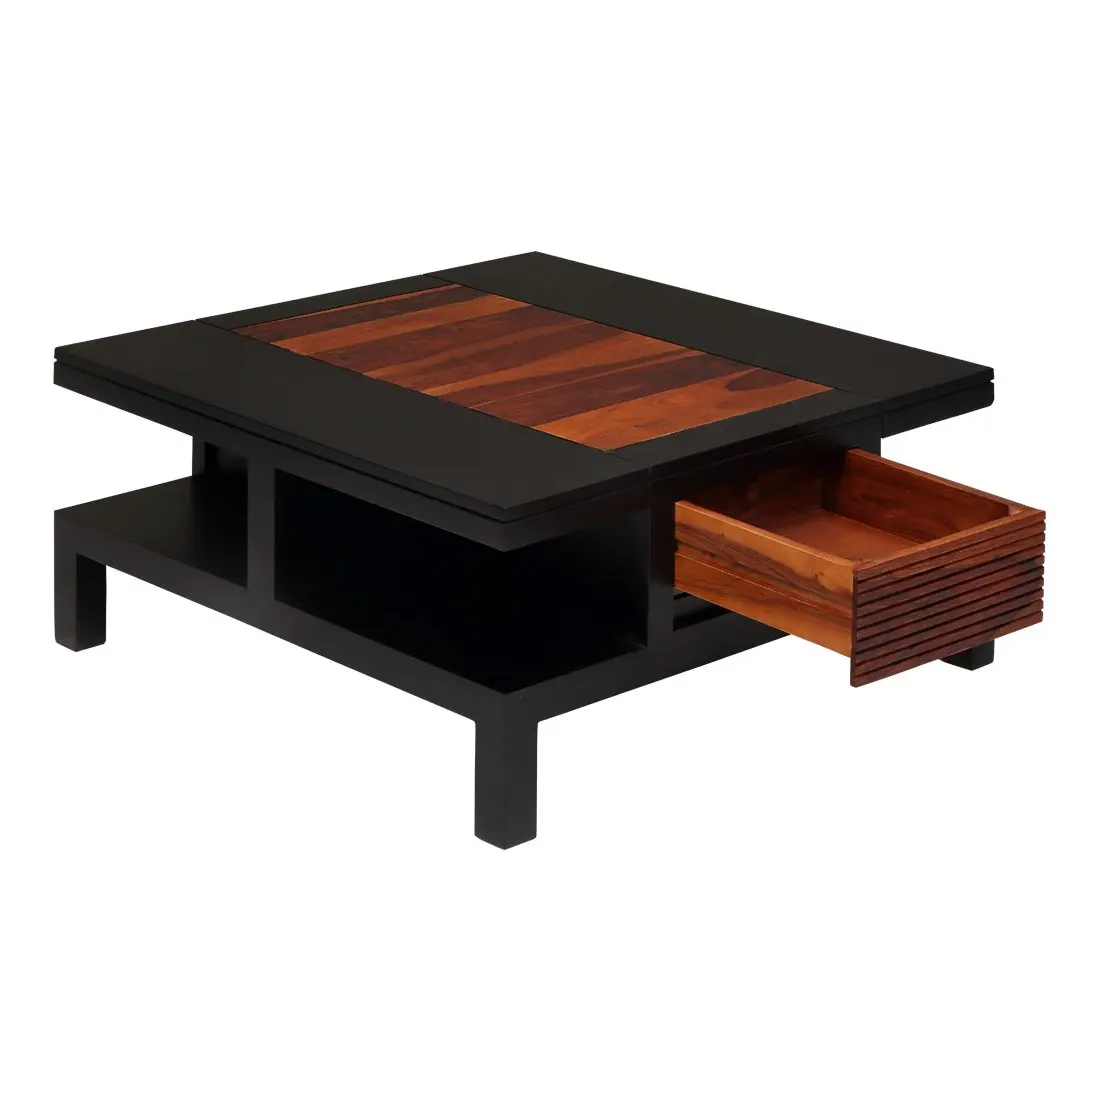 Coffee table with single drawer made of solid sheesham wood